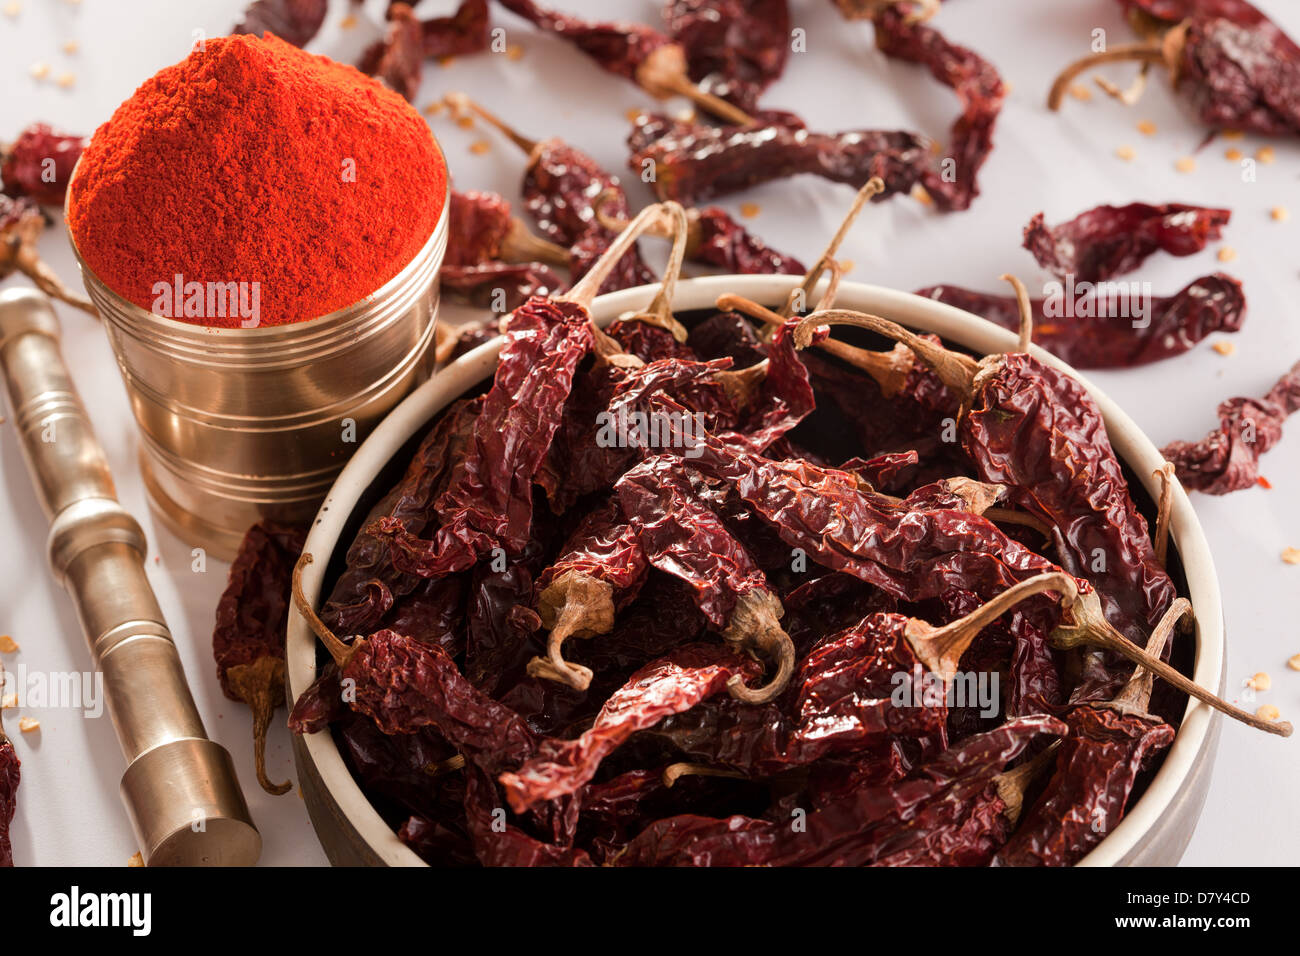 Red Chilly-Pulver. Stockfoto